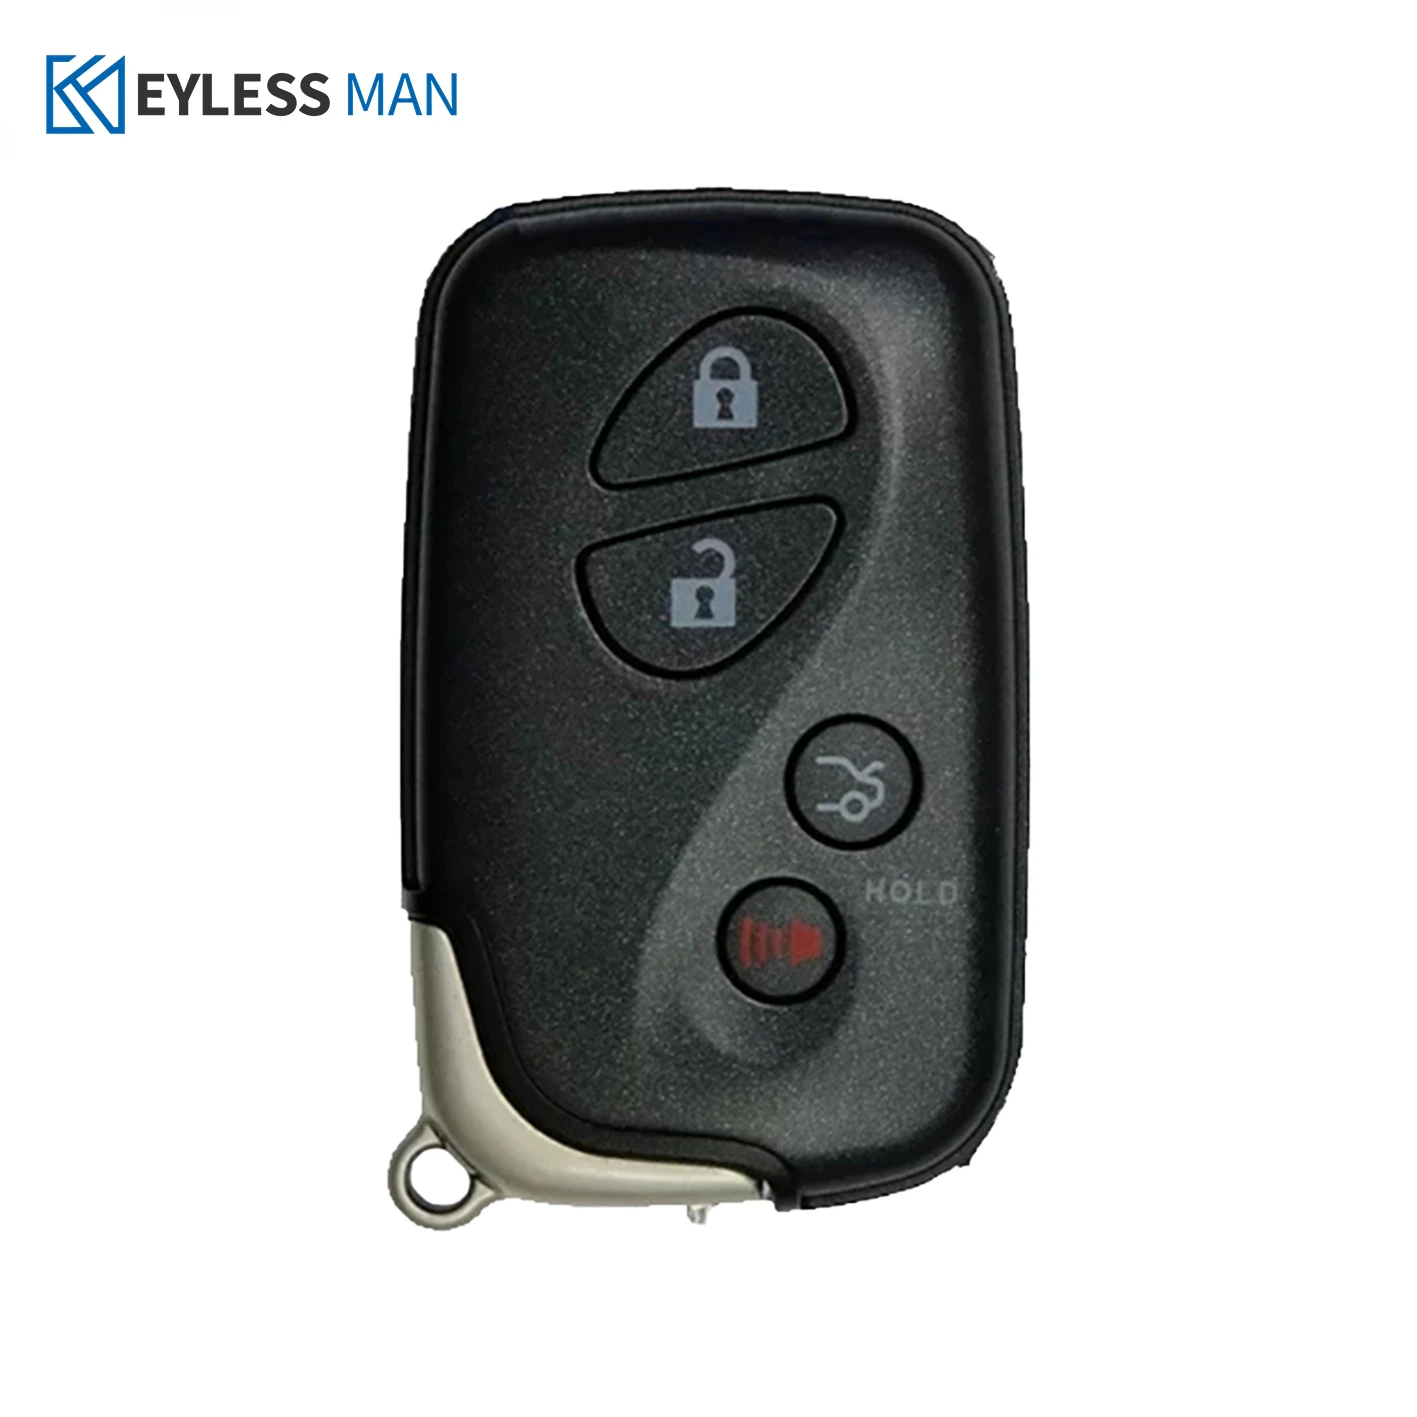 HYQ14AAB Smart Remote Car Key Fob for Lexus IS250 IS350 ES350 GS430 2006-2010 433MHZ With ID71 Chip 271451-0140